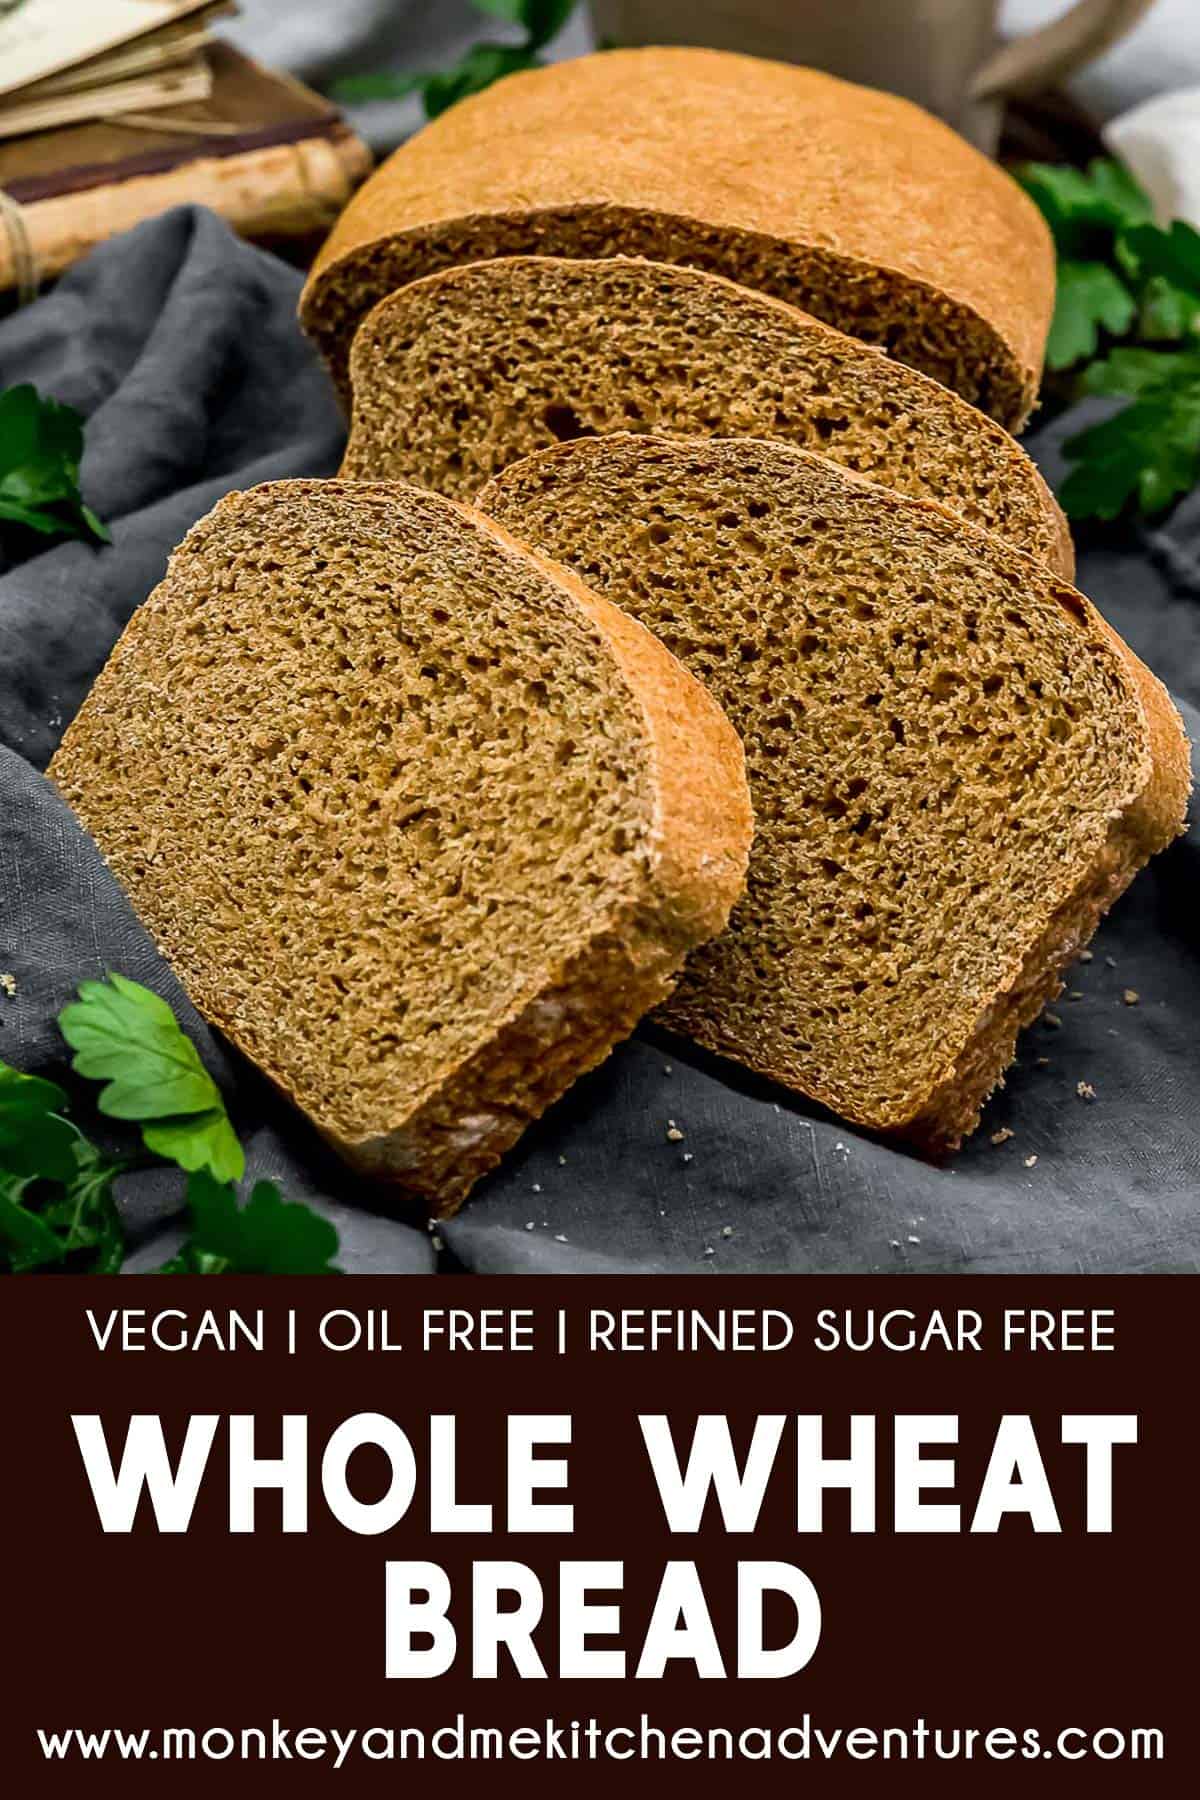 Whole Wheat Bread (100% Whole Wheat) with text description